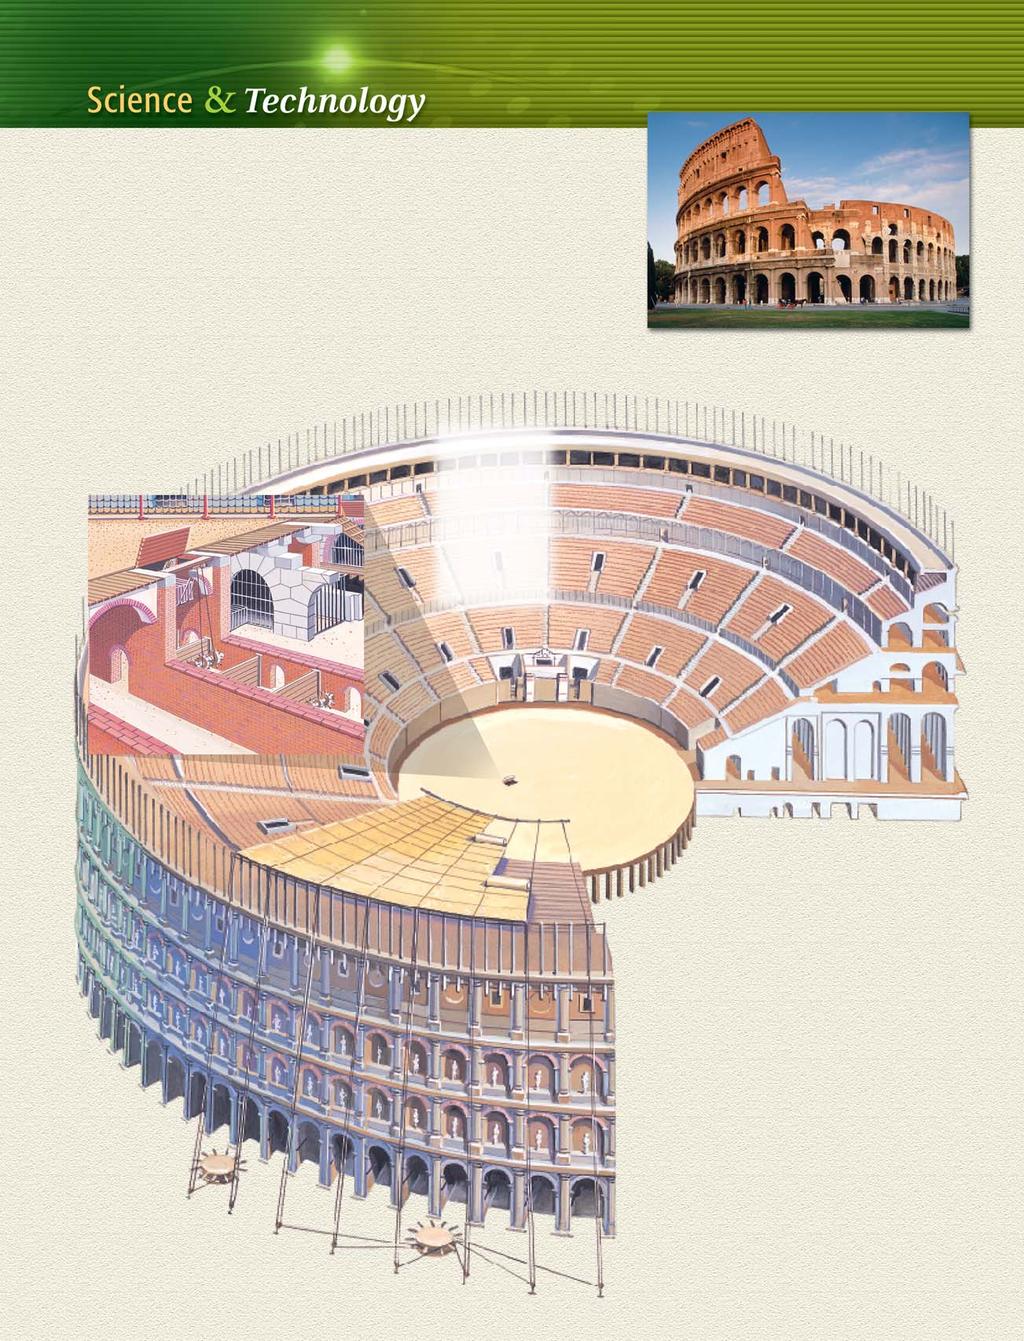 The Colosseum The Colosseum was one of the greatest feats of Roman engineering and a model for the ages. The name comes from the Latin word colossus, meaning gigantic.